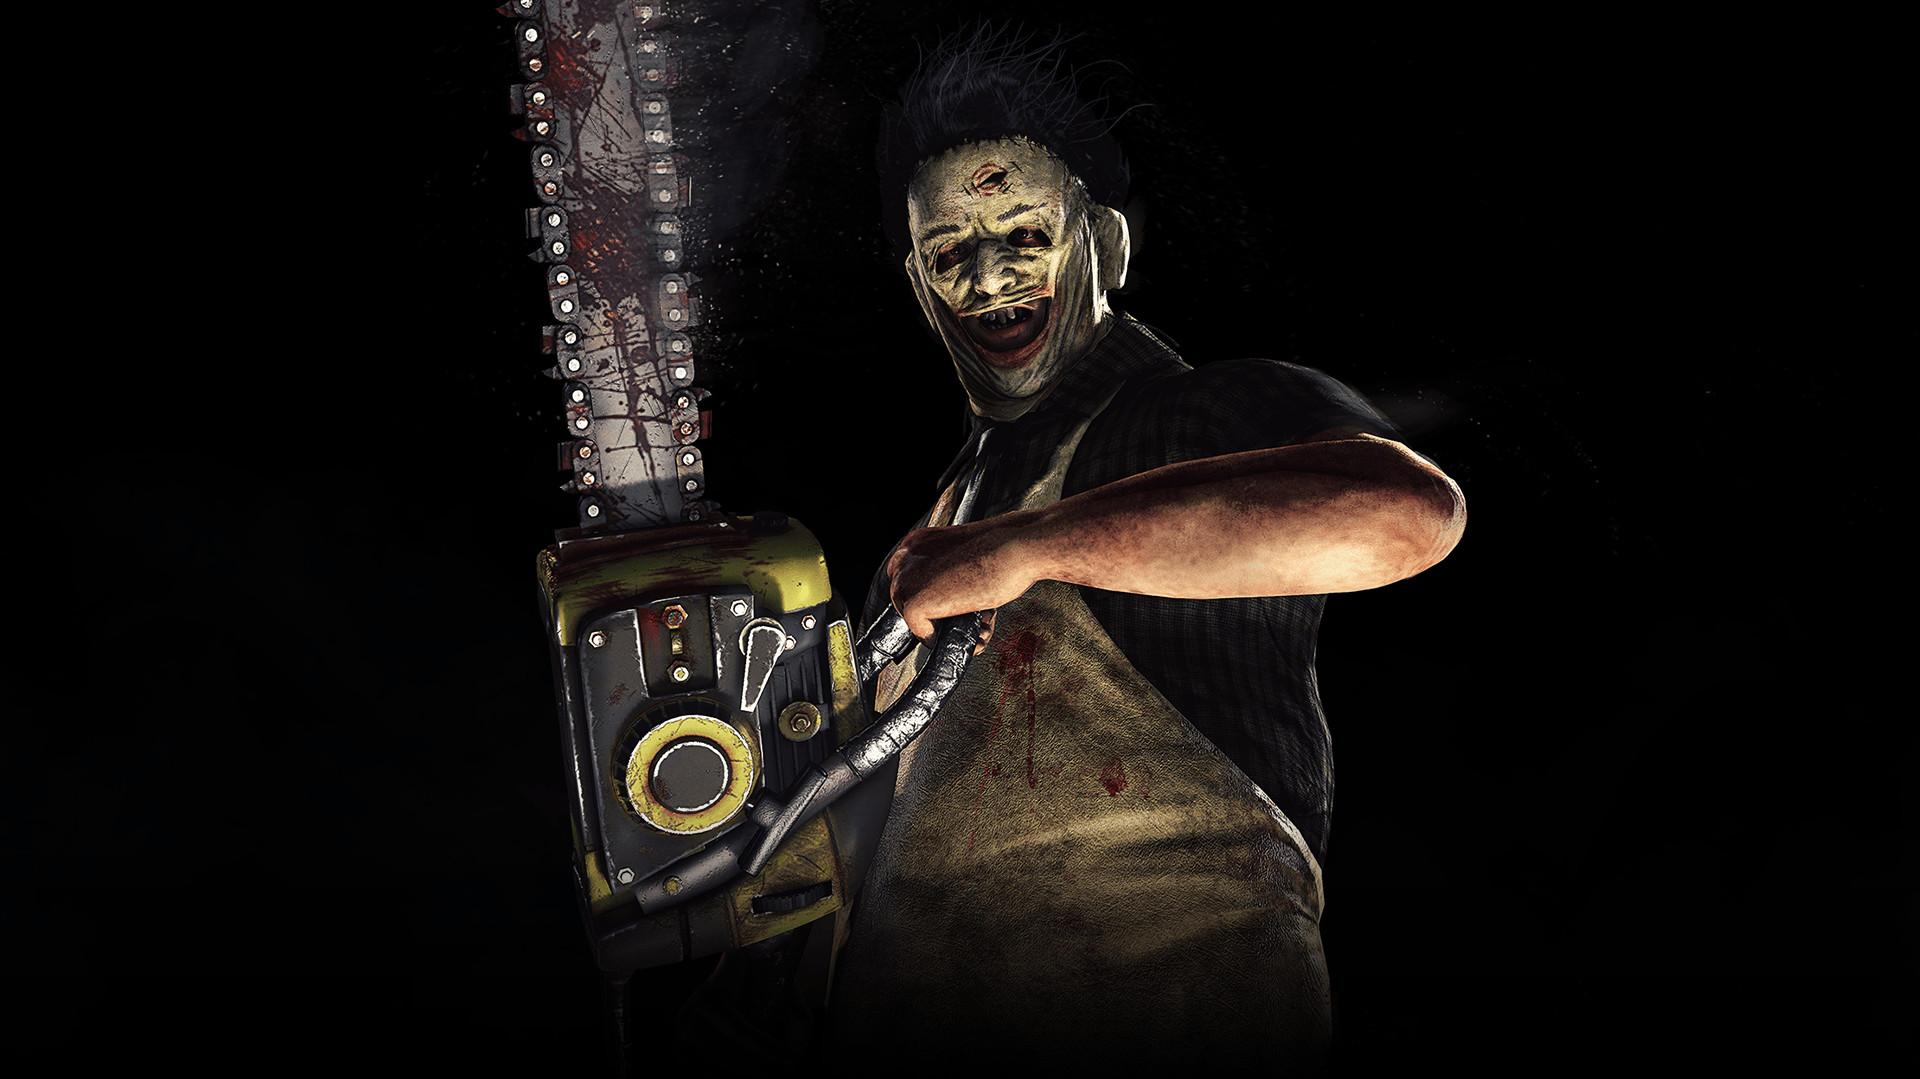 Источник: https://store.steampowered.com/app/524290/Leatherface/